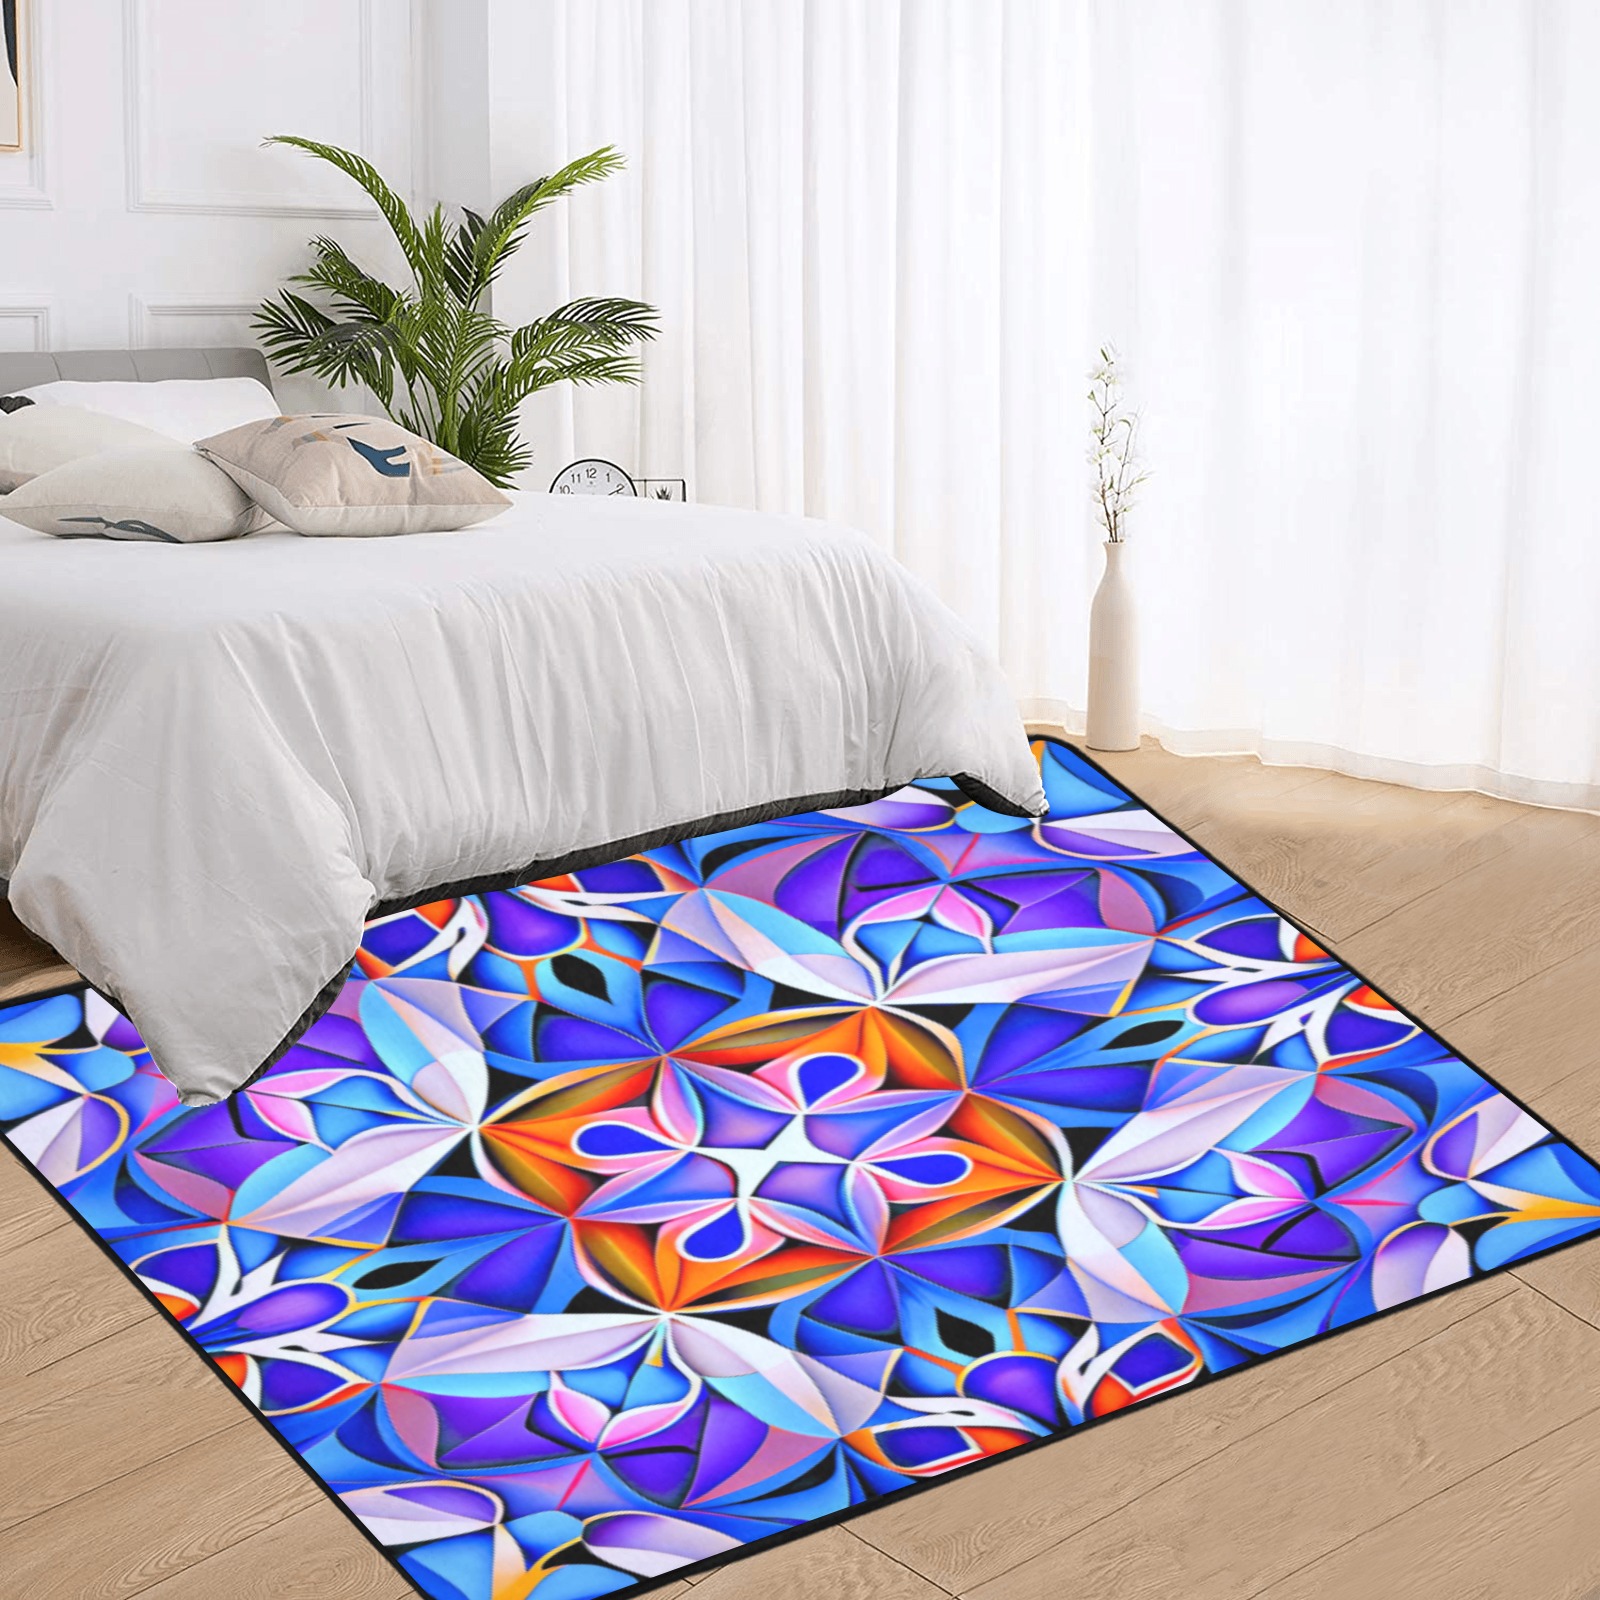 intricate pattern, blue, purple, orange and pink Area Rug with Black Binding 7'x5'